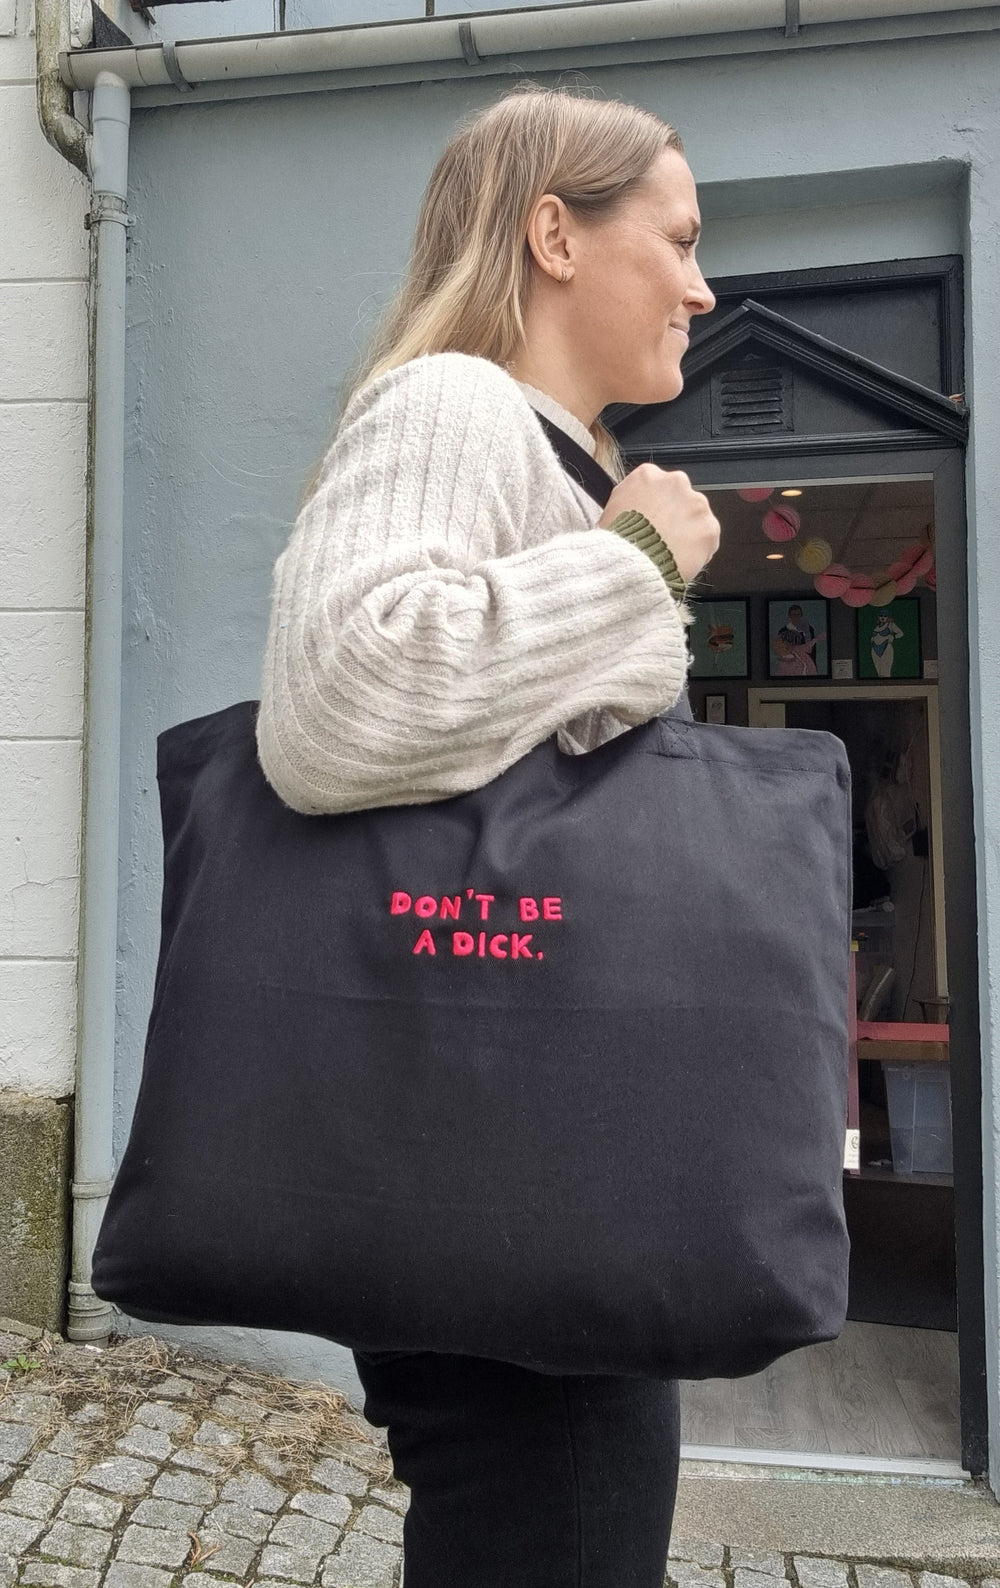 Don't be a d!ck - Large organic tote bag